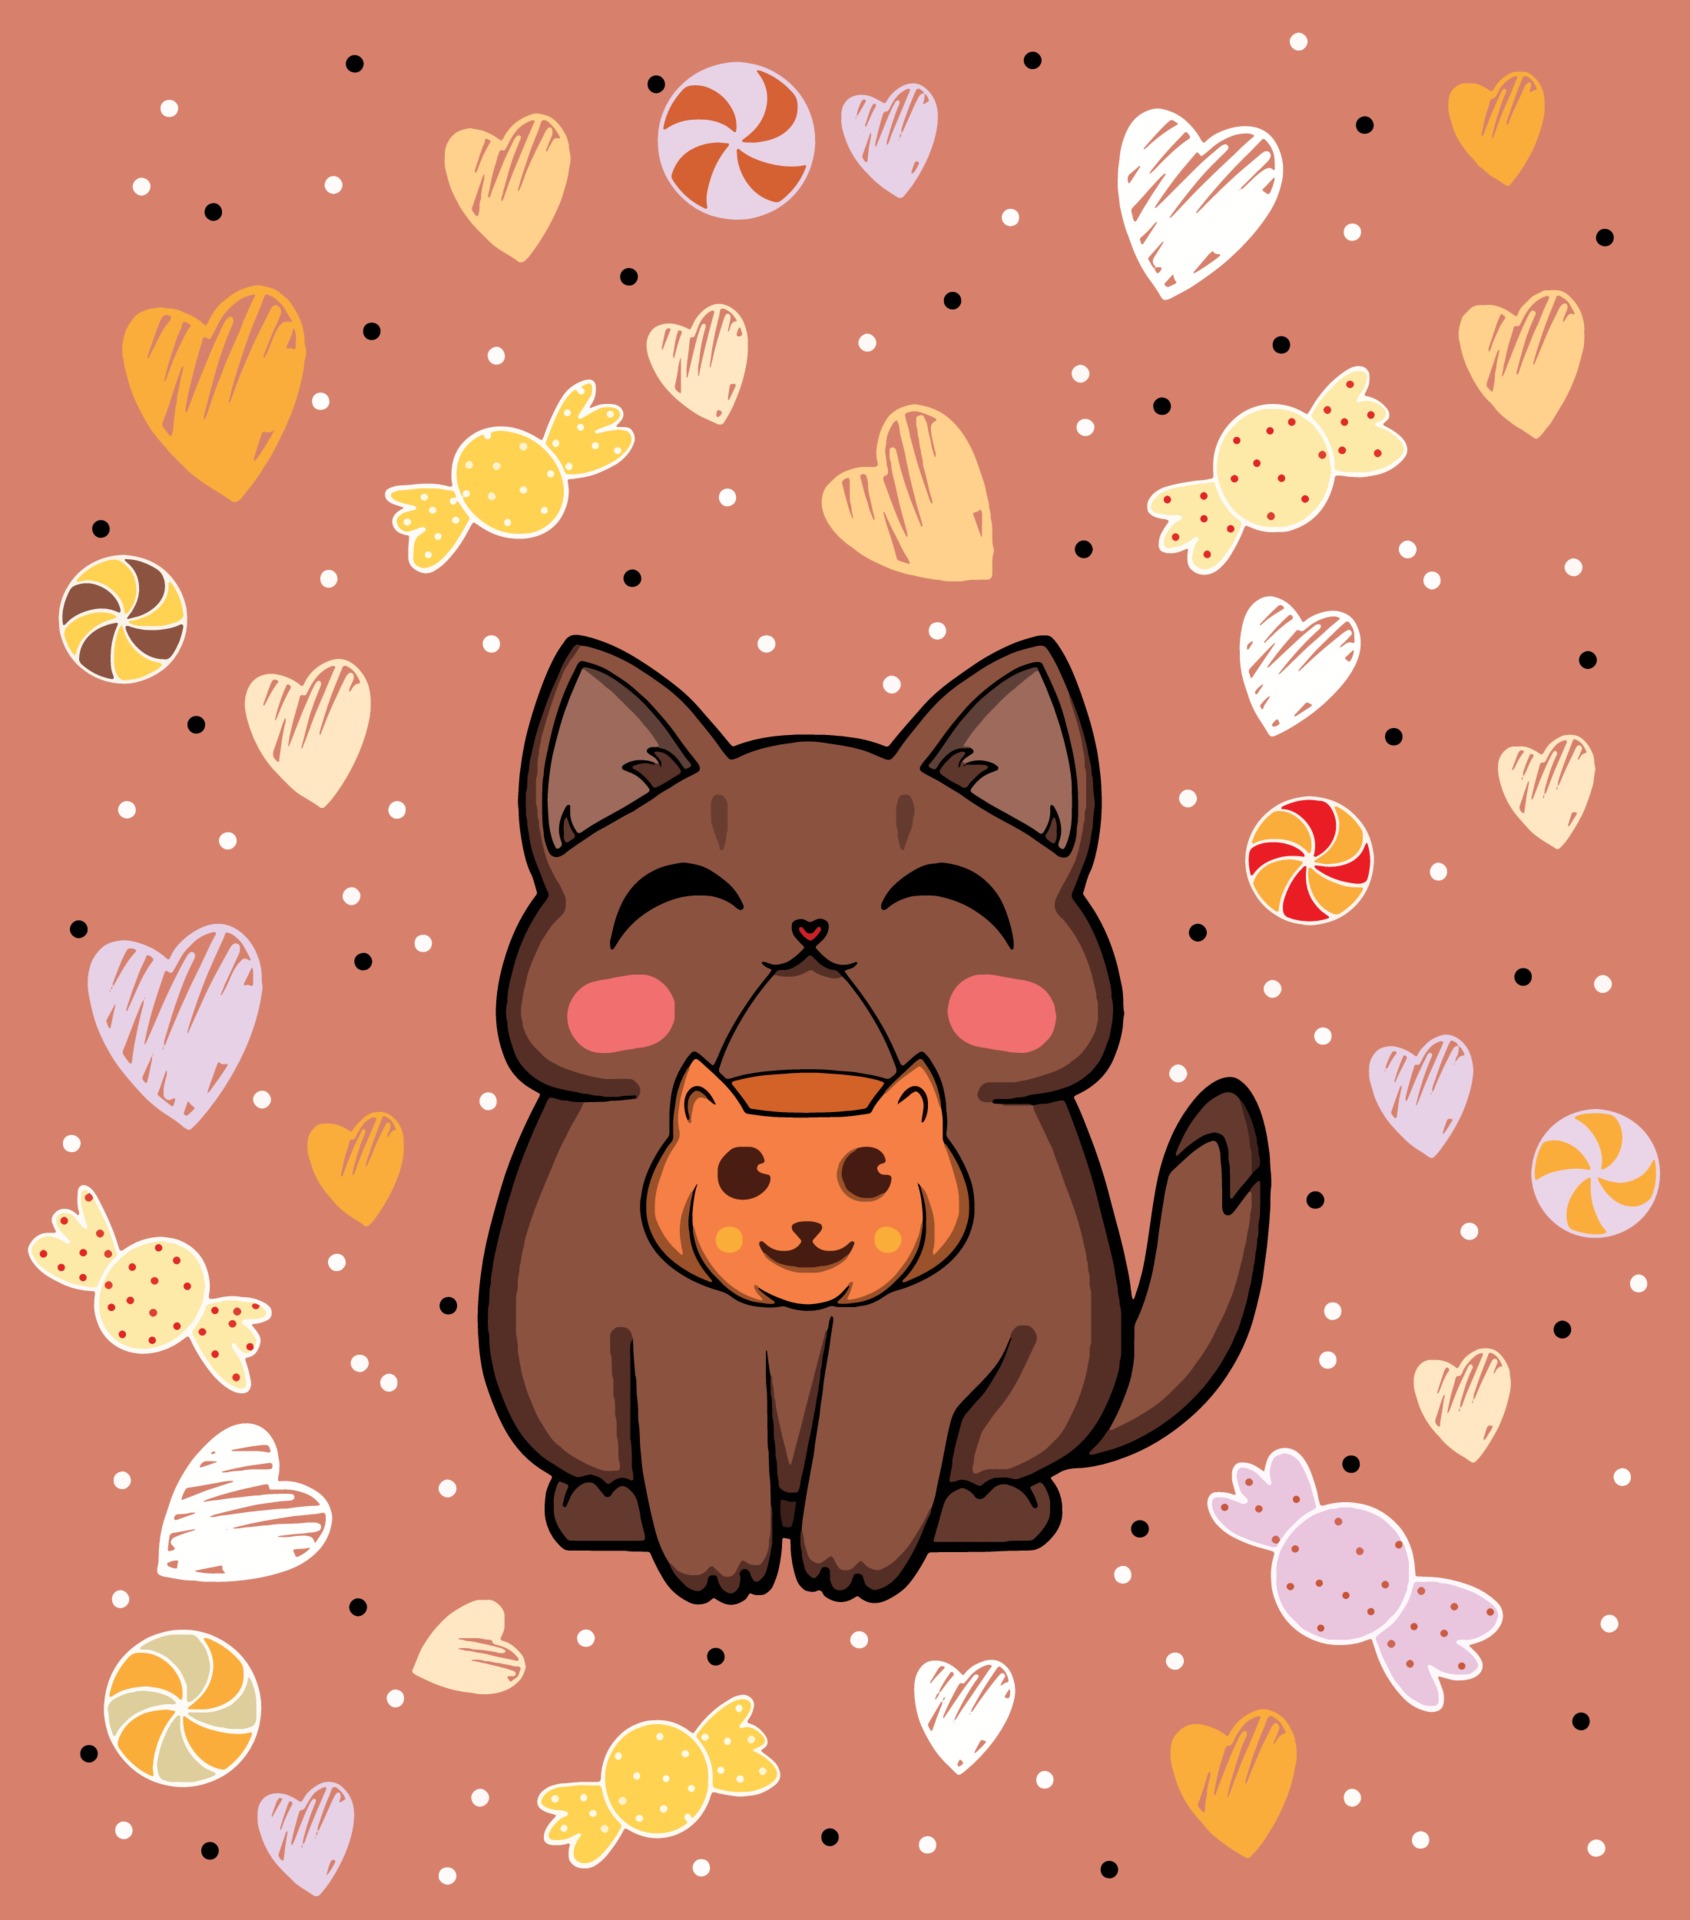 Halloween cat illustration. Drawn cute cat with a pumpkin sweets